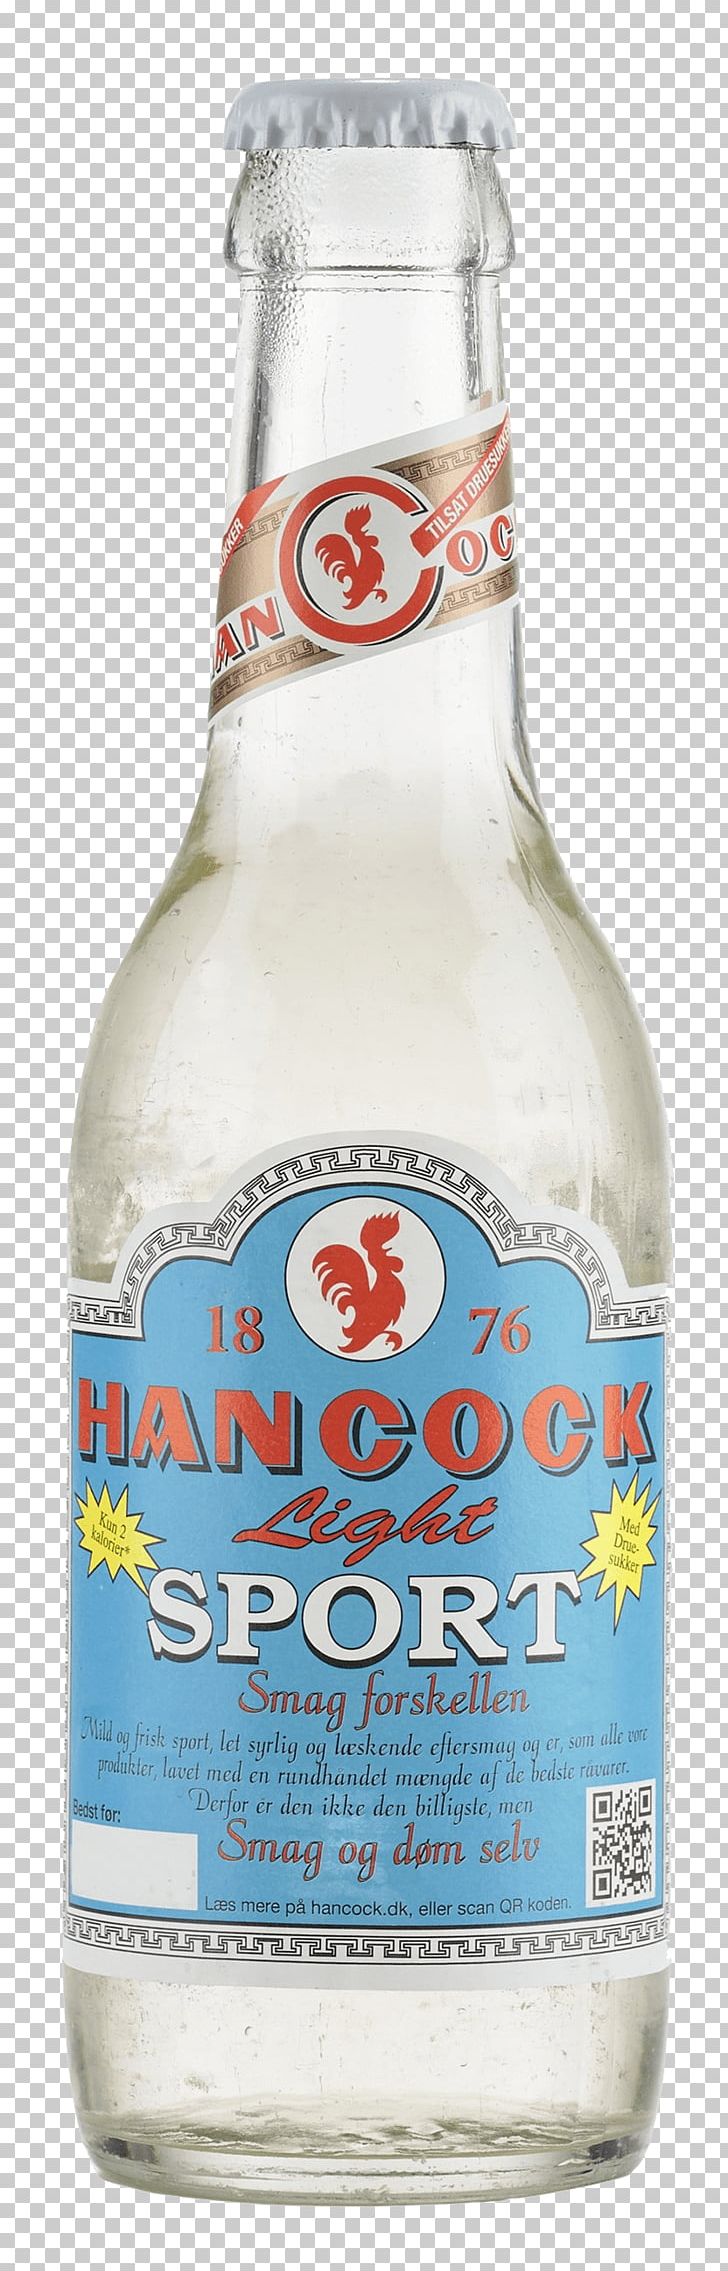 Hancock Breweries A / S Beer Glass Bottle Brewery Liqueur PNG, Clipart, Alcoholic Beverage, Beer, Beer Bottle, Bottle, Brewery Free PNG Download